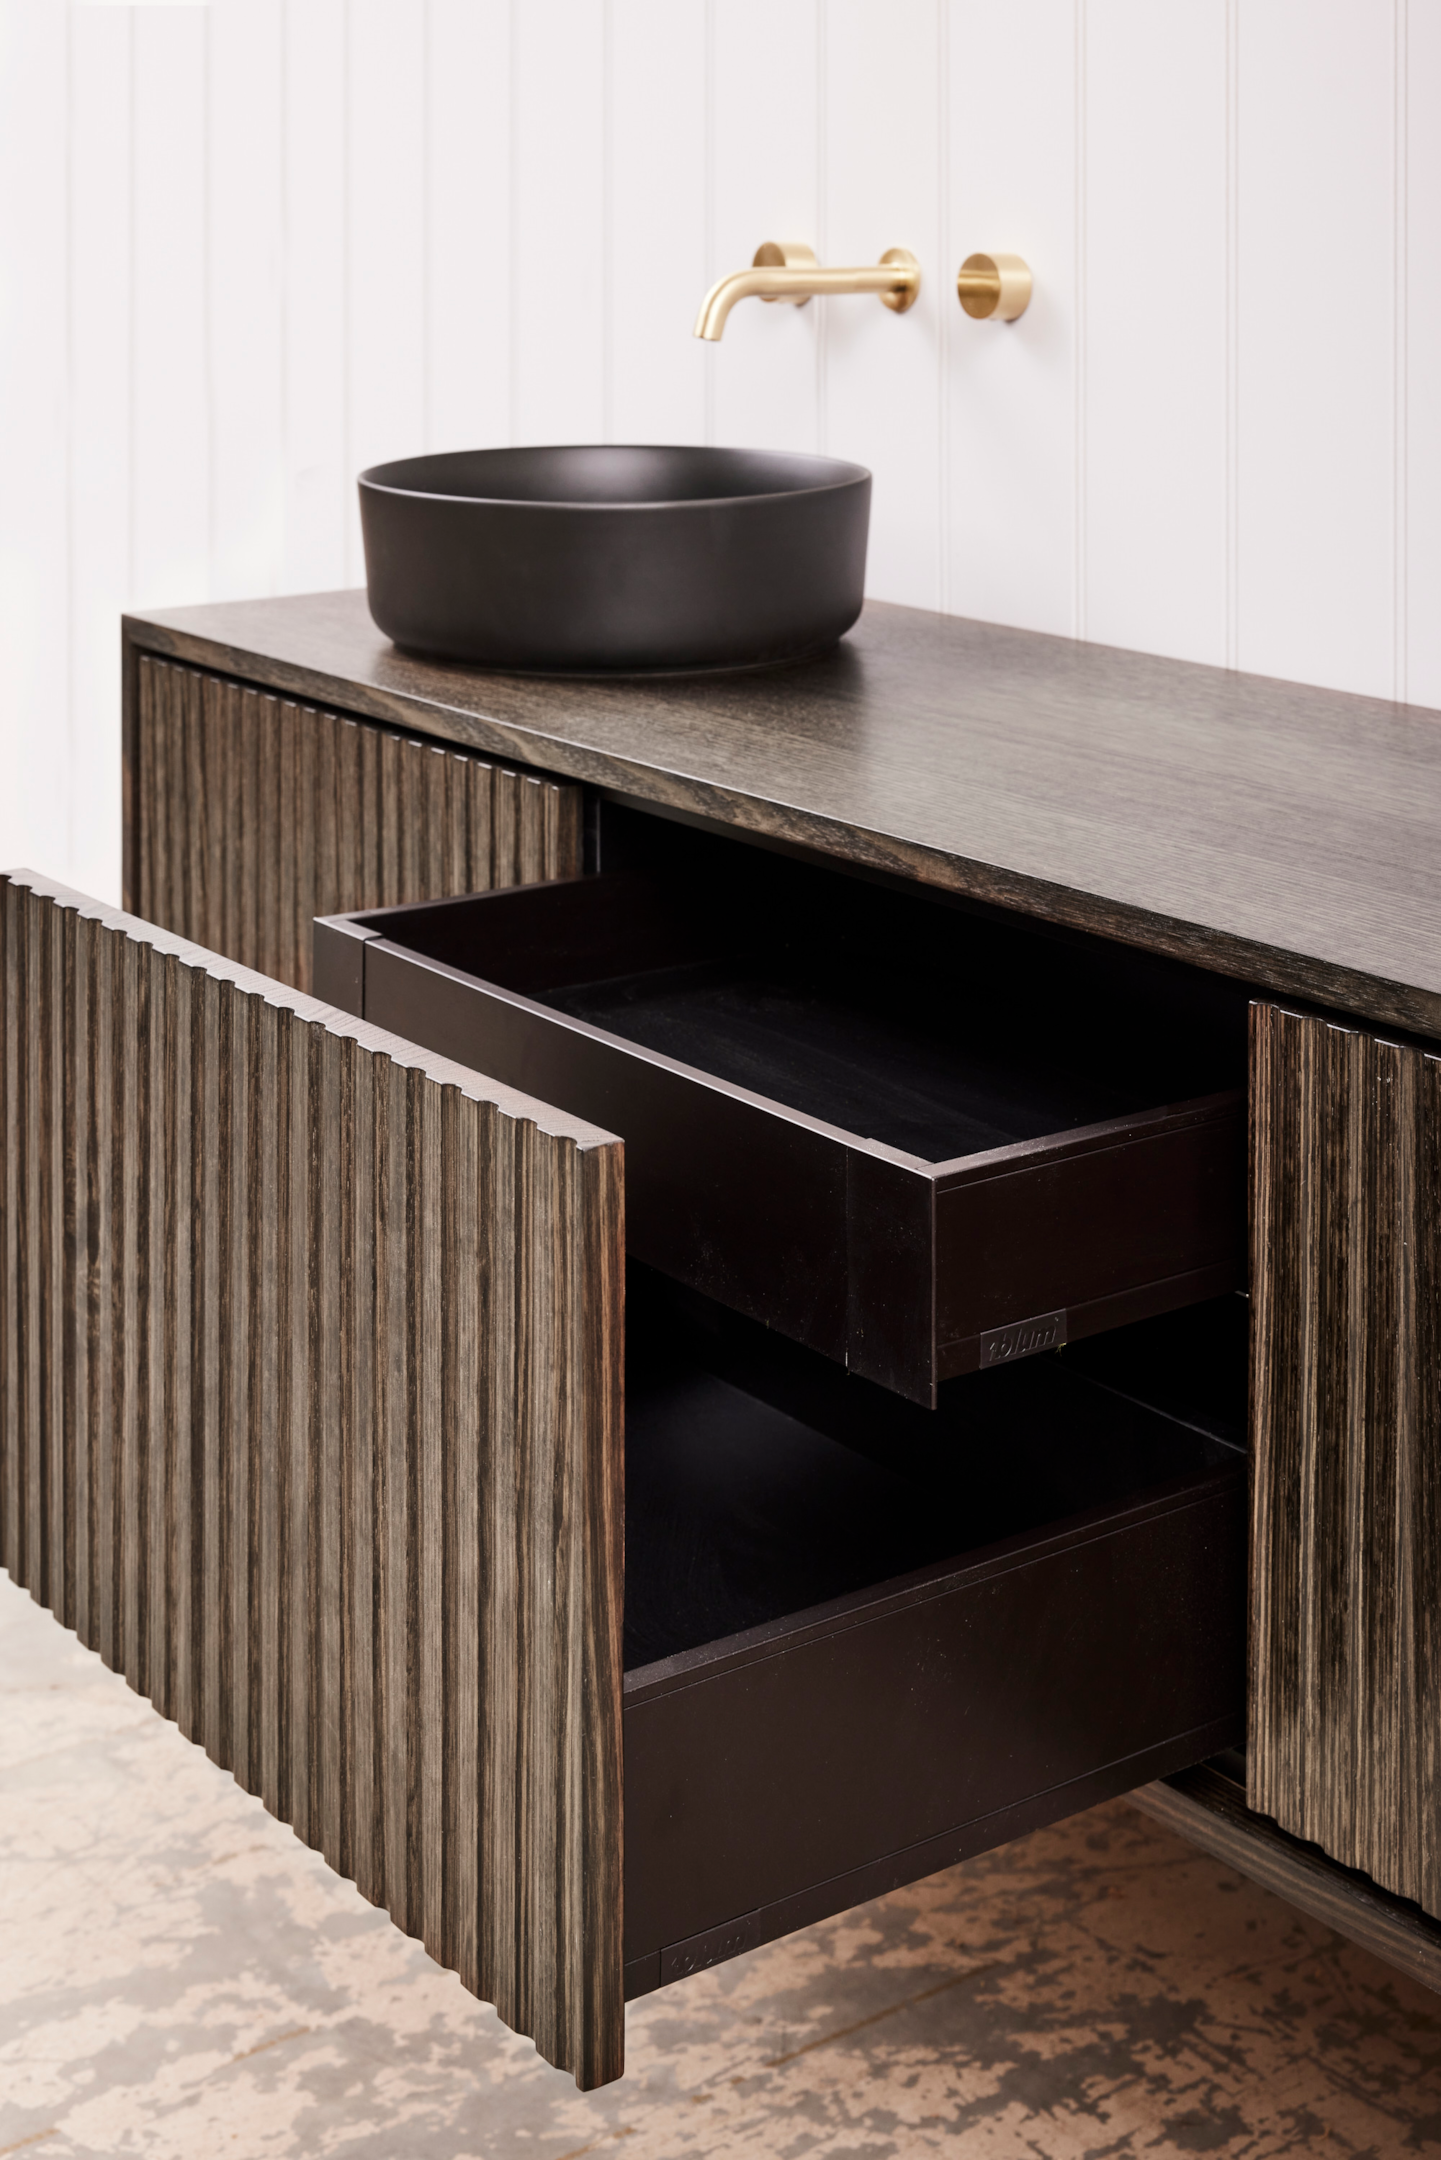 A Kariko Fenton timber bathroom vanity with two doors, and a centre drawer with a concealed second drawer inside